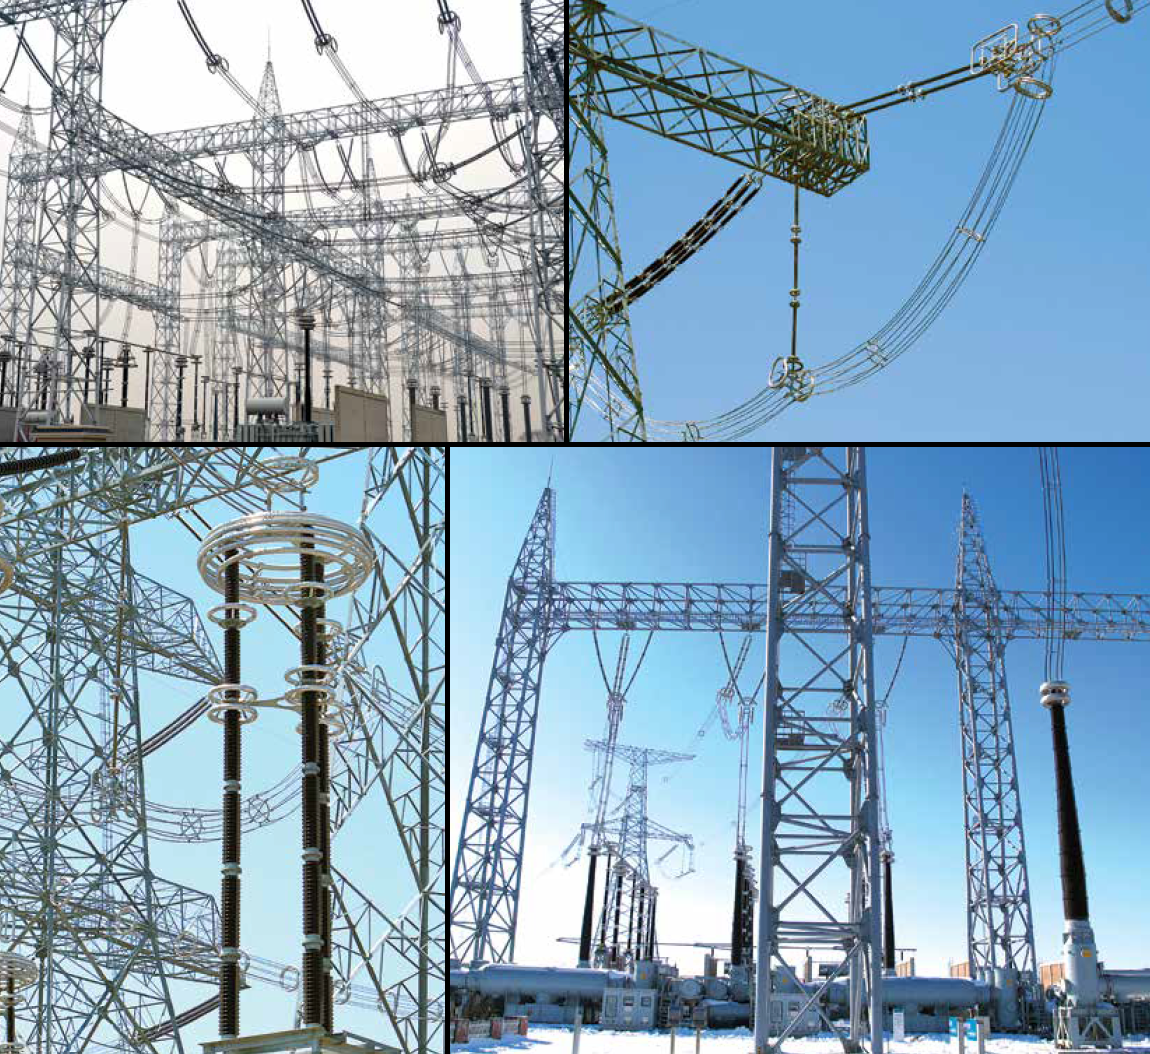 UHV projects in India and China have pushed the need to set new standards for equipment used at such voltage levels.